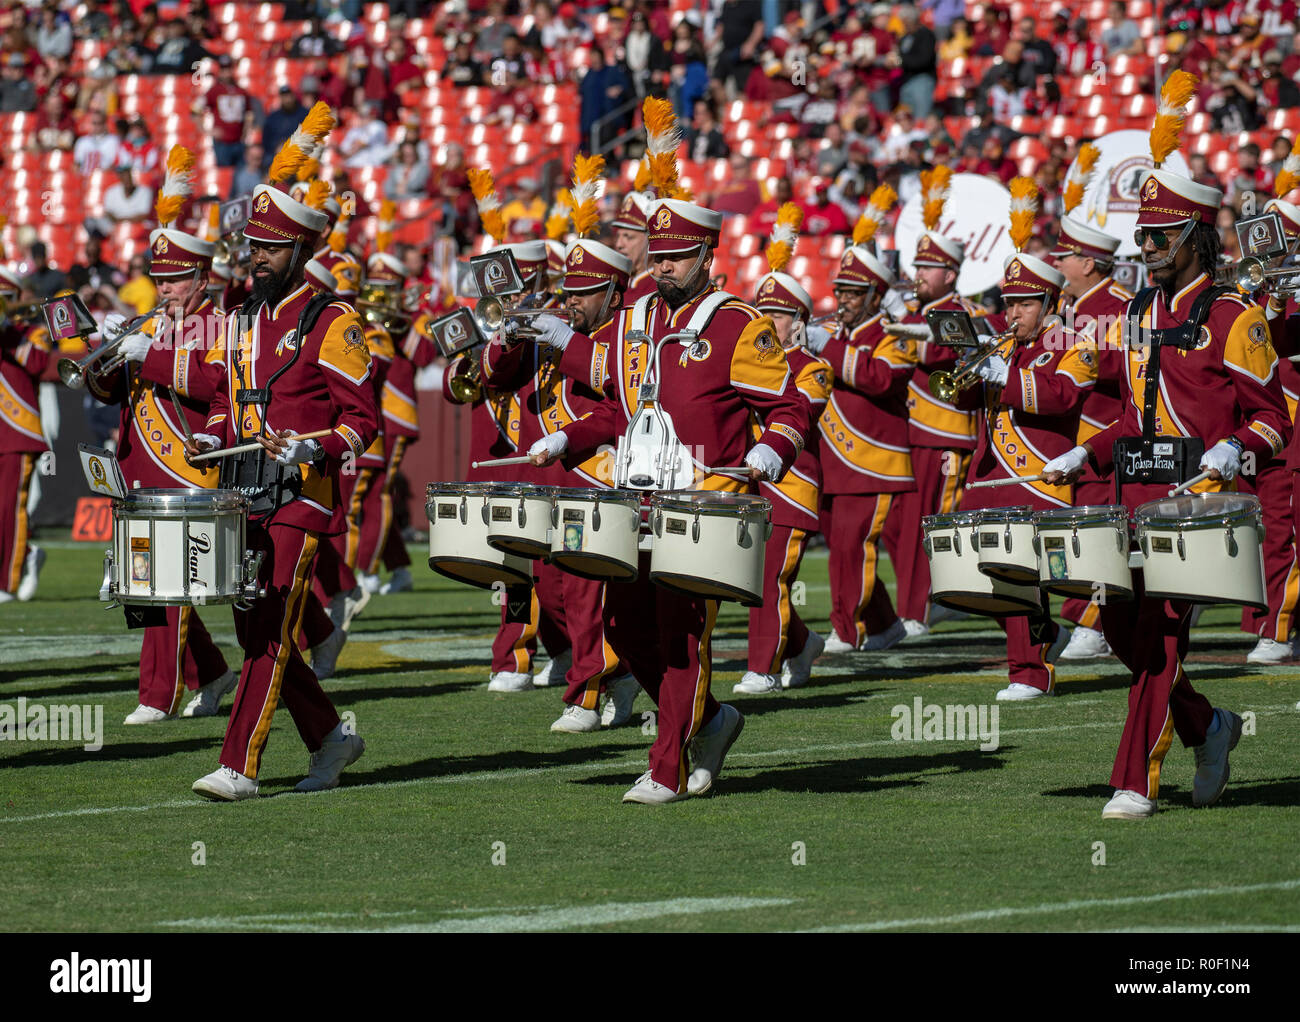 Washington Redskins Marching Band performs prior to the game against the Atlanta Falcons at FedEx Field in Landover, Maryland on Sunday, November 4, 2018. Credit: Ron Sachs/CNP /MediaPunch Stock Photo